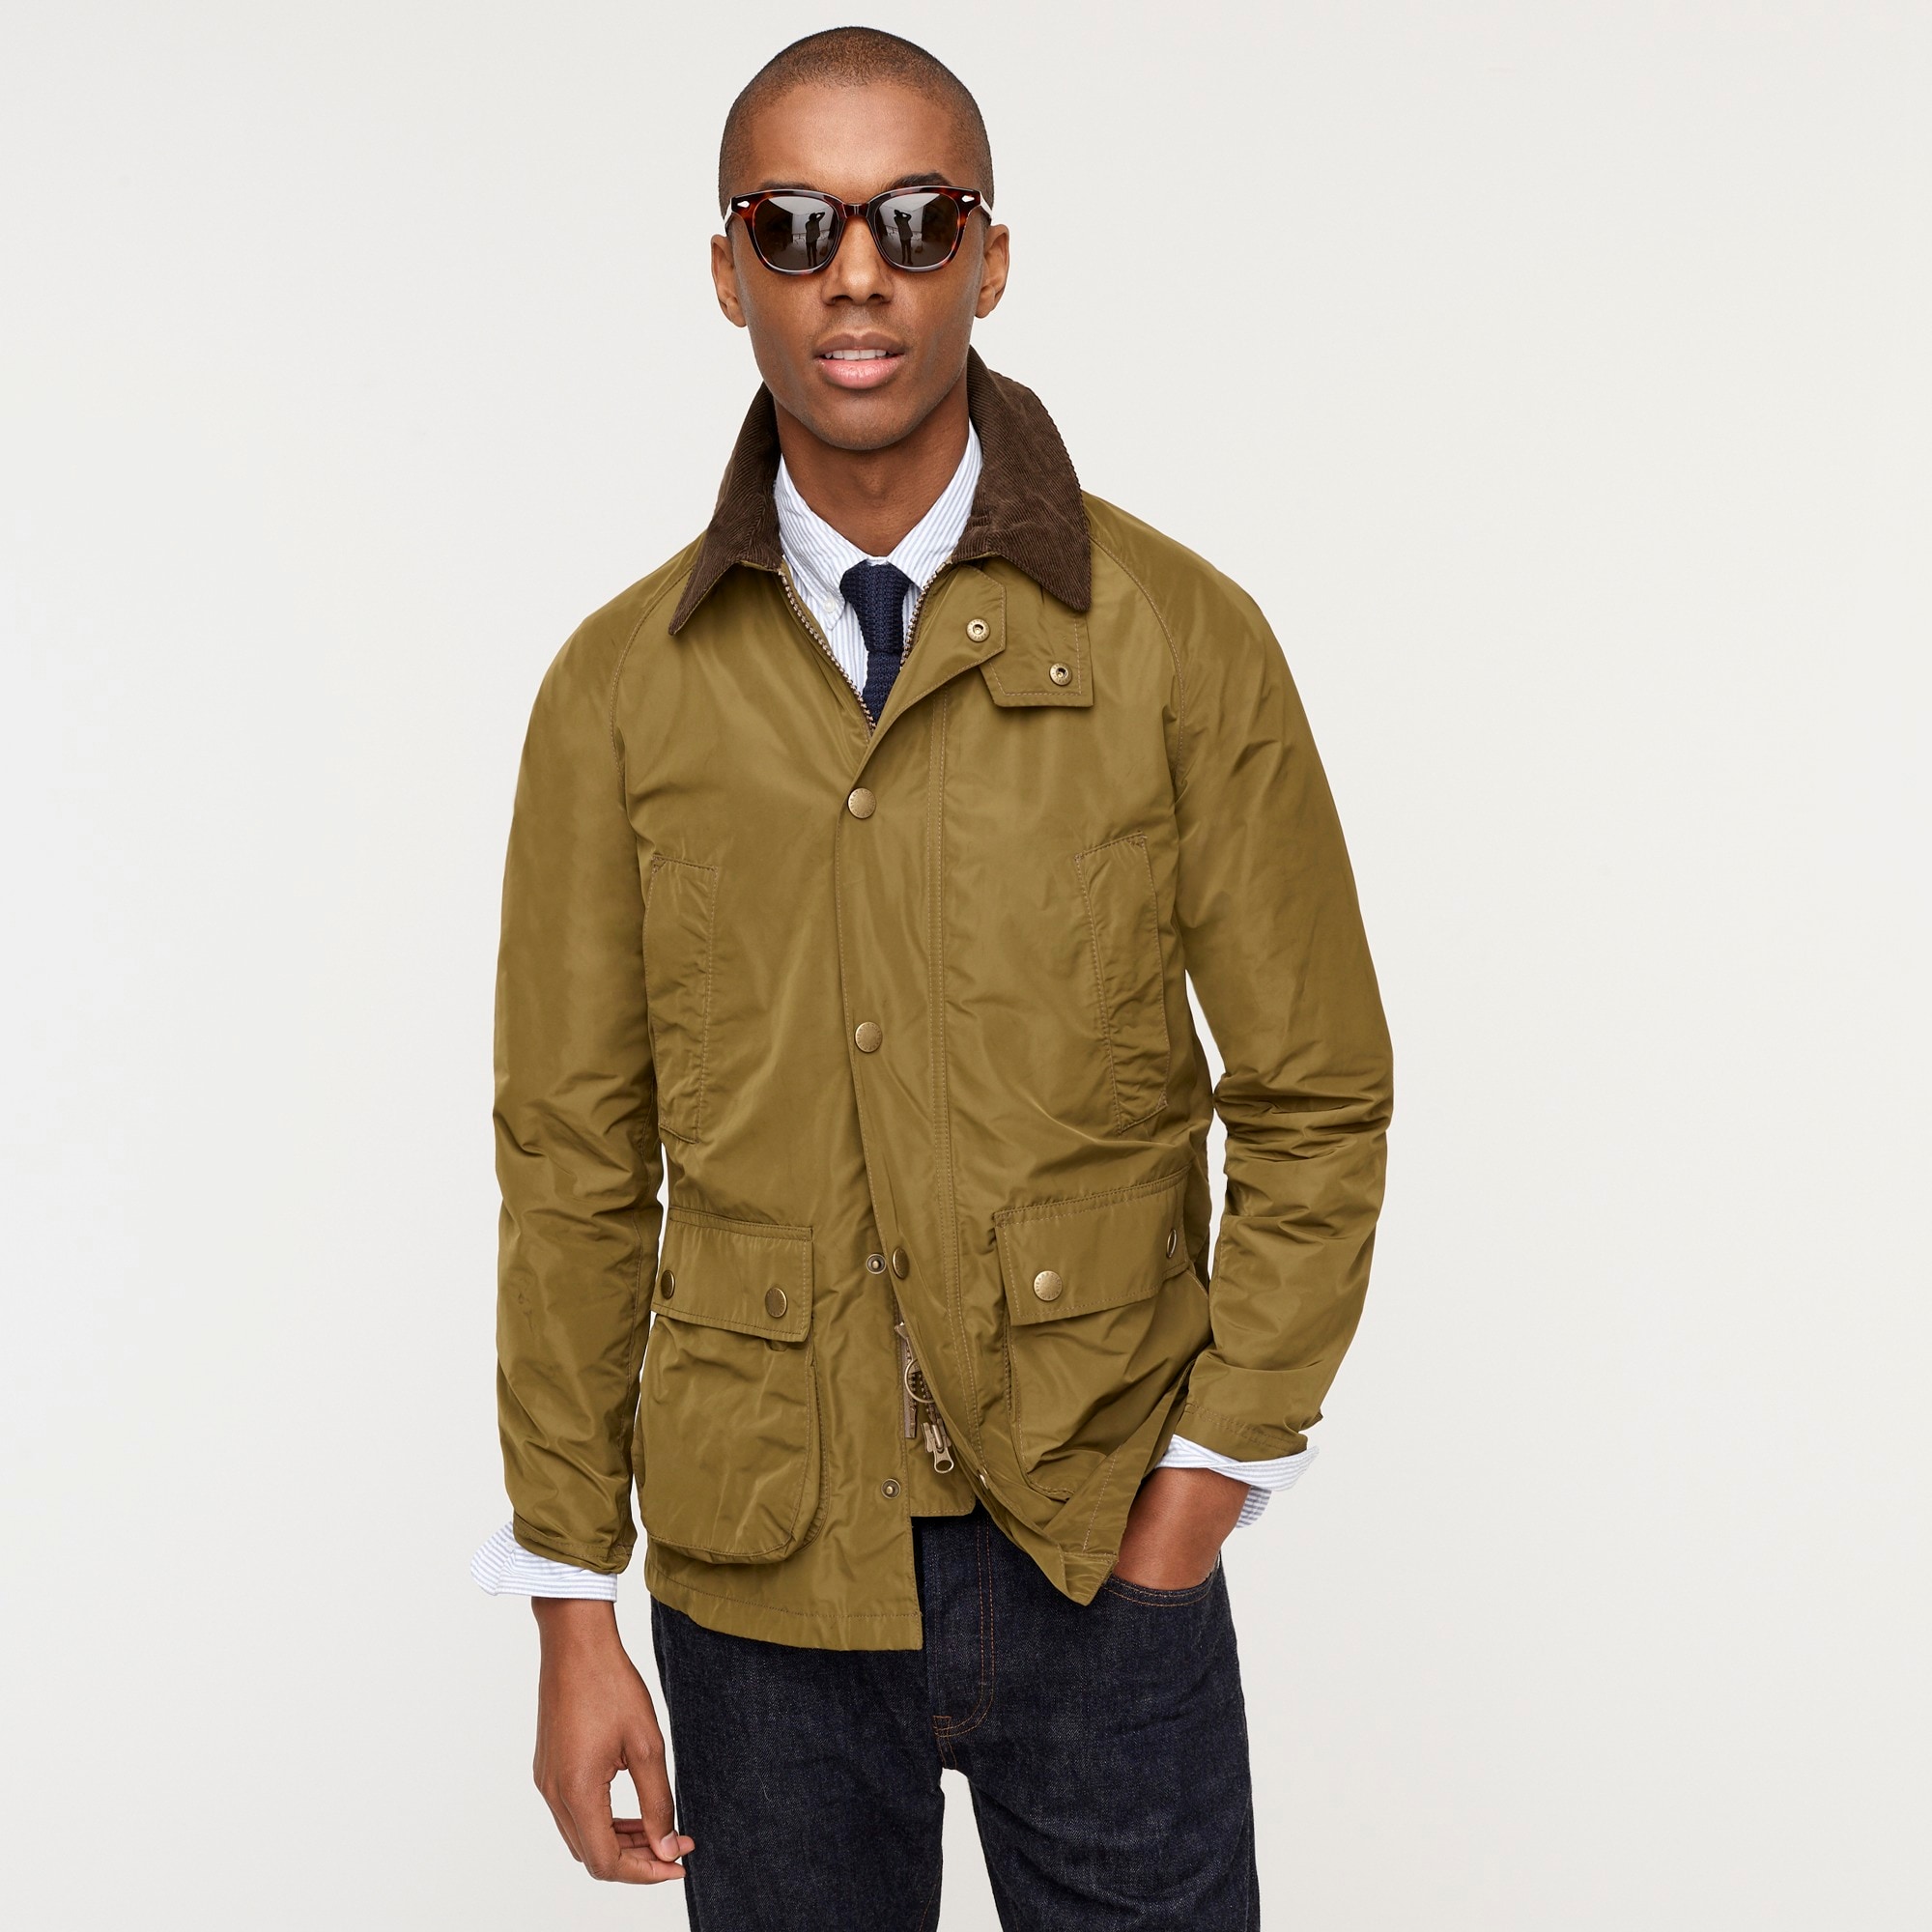 barbour usa store